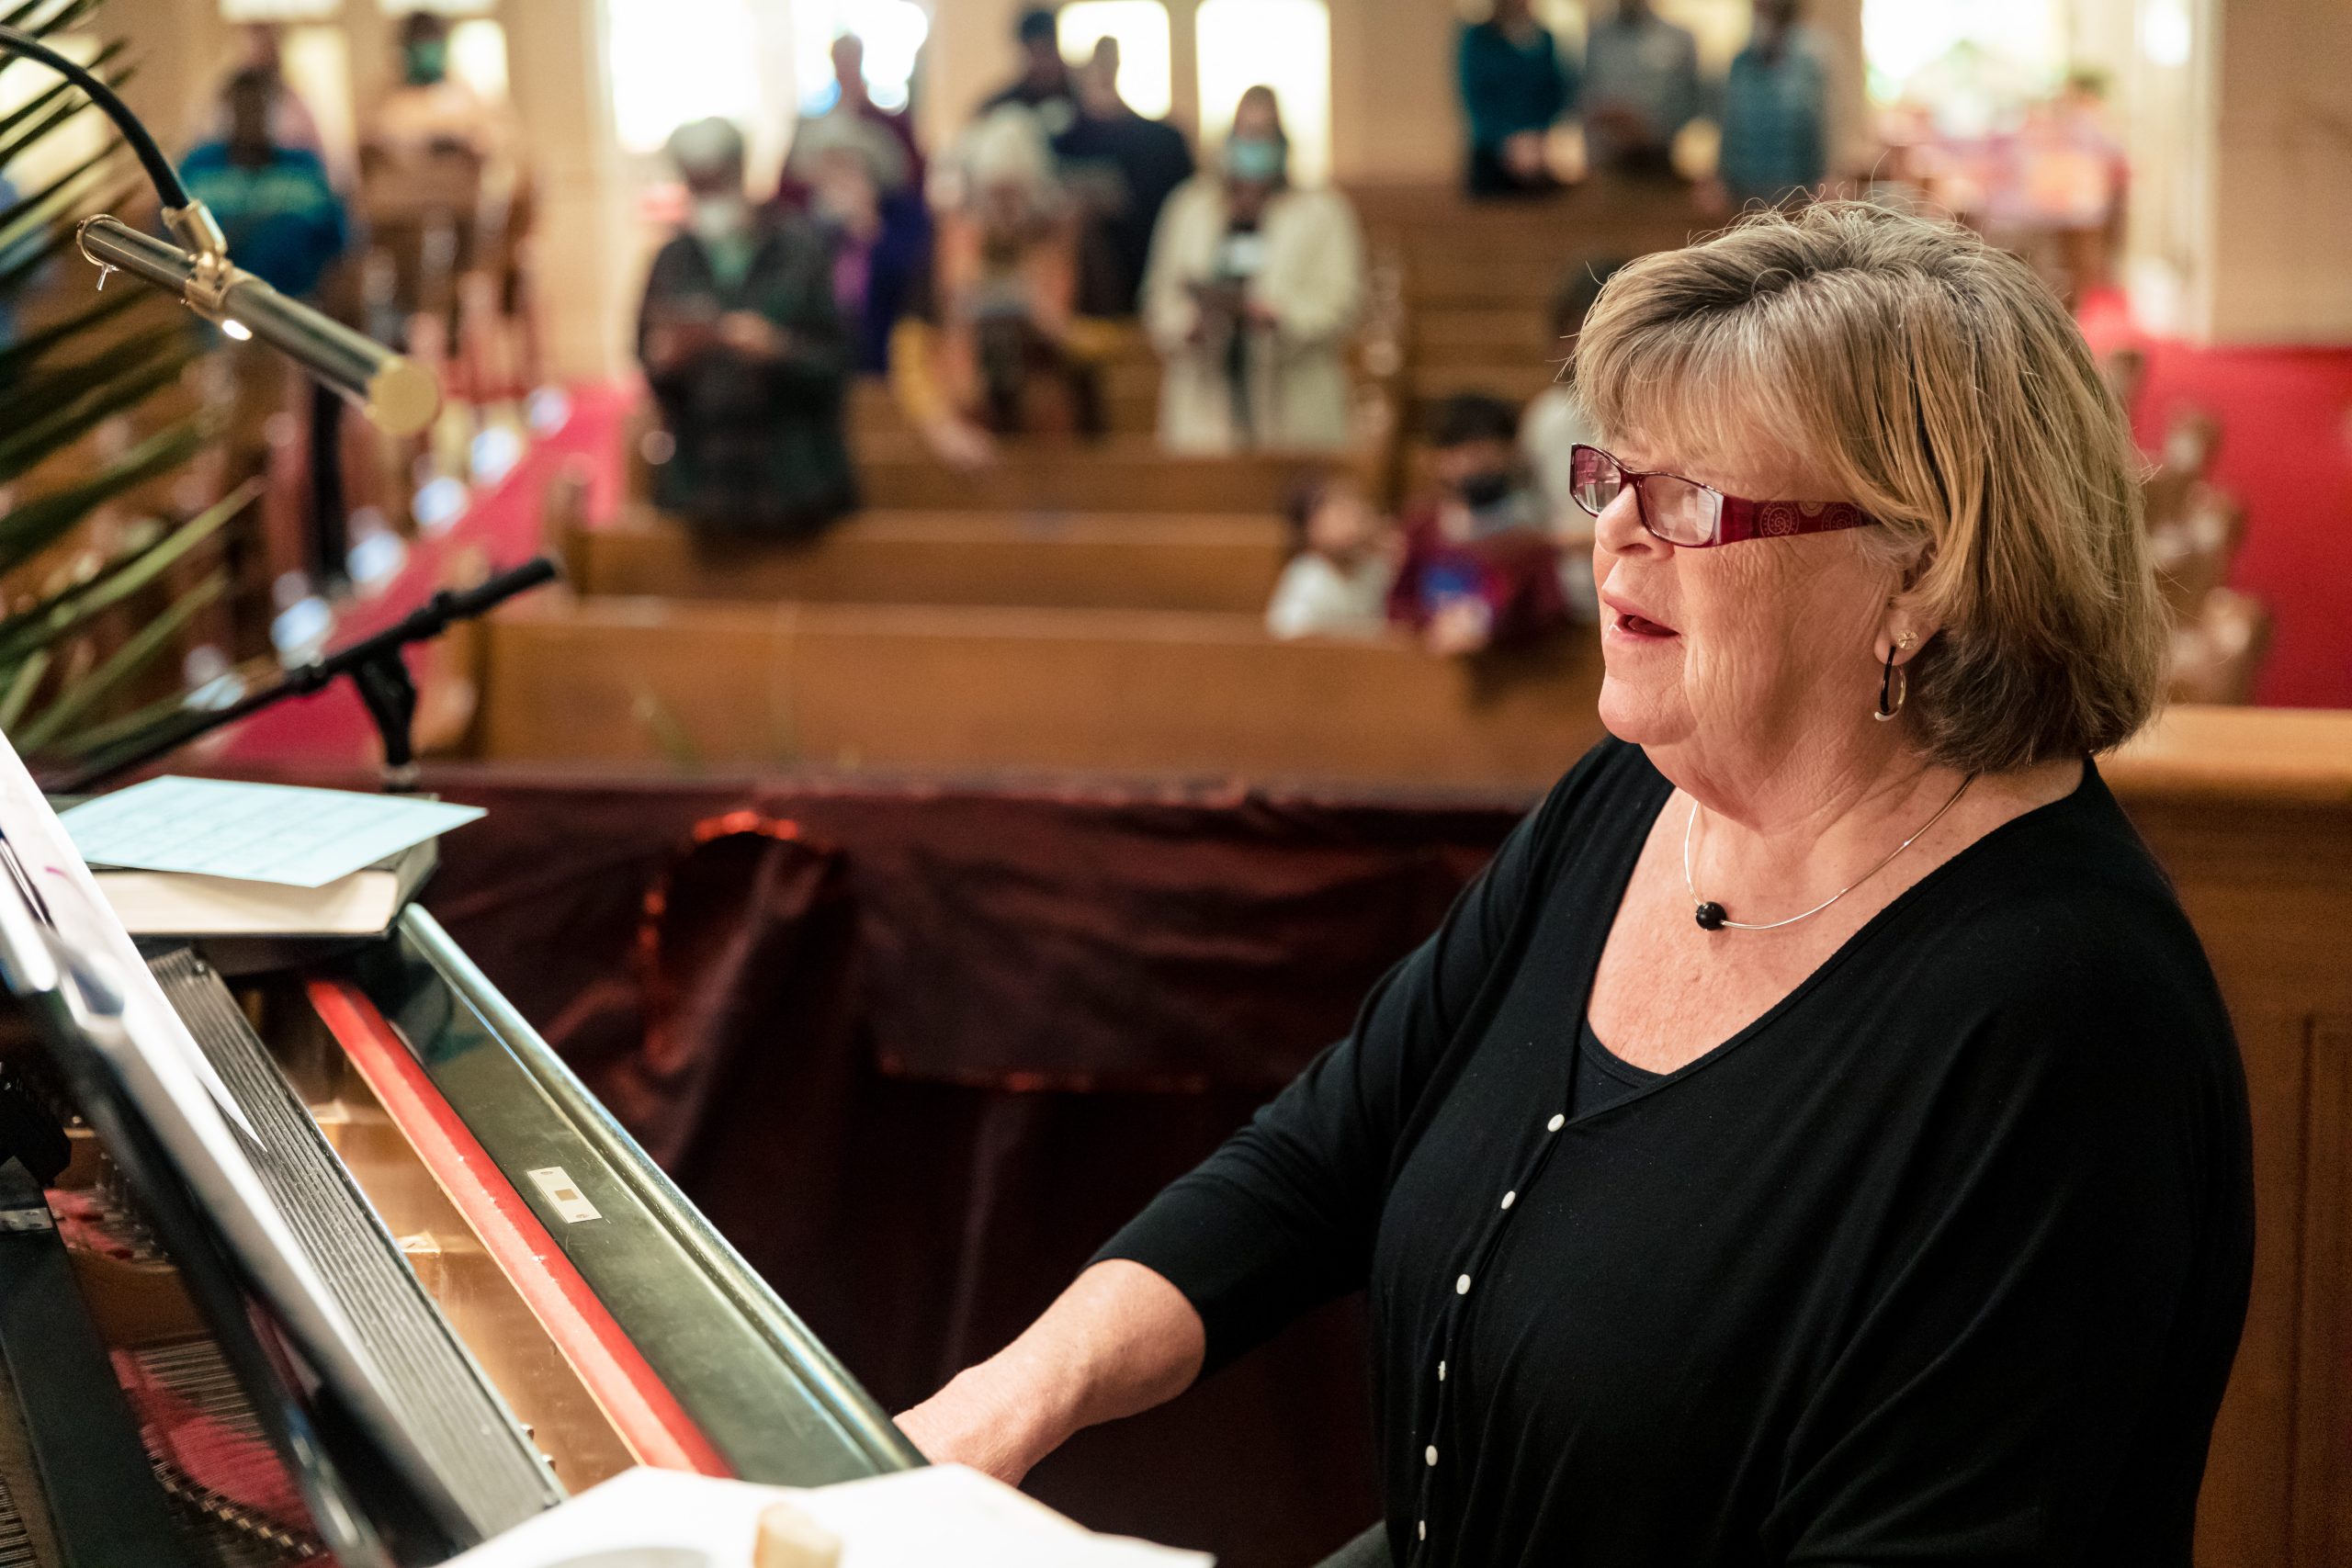 Music director Janice Peterson at the piano.